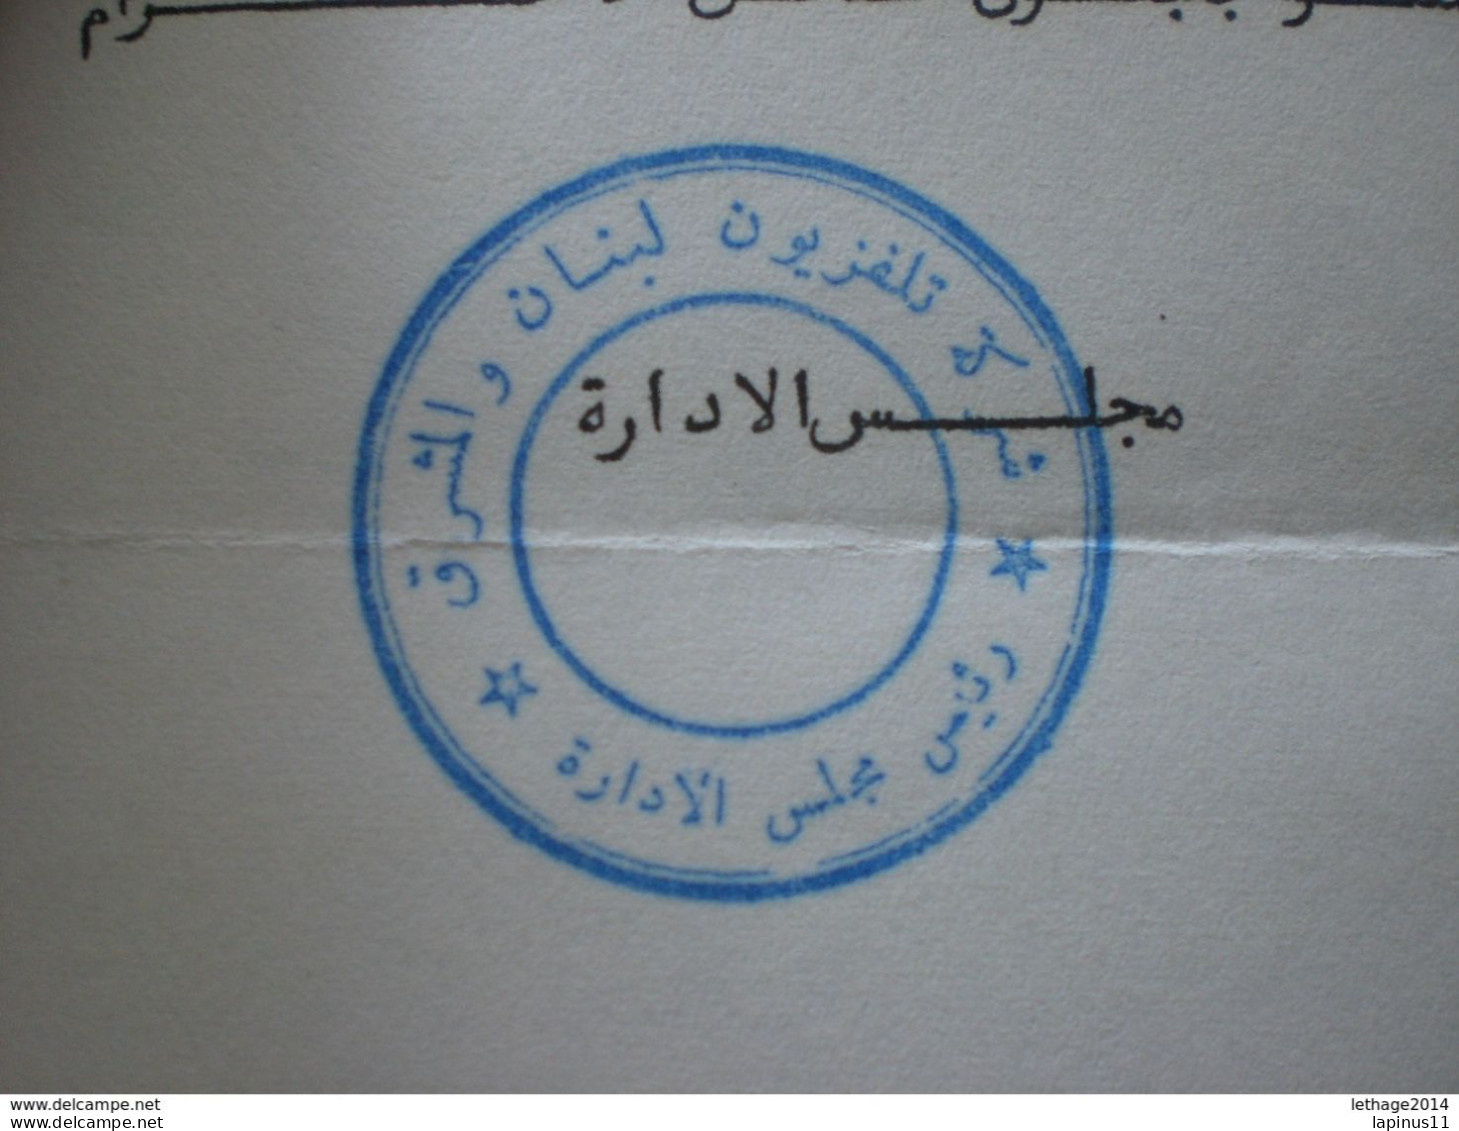 LEBANON لبنان LIBAN DOCUMENT TELE LIBAN CANAL 2 1967 MEETING - Collections